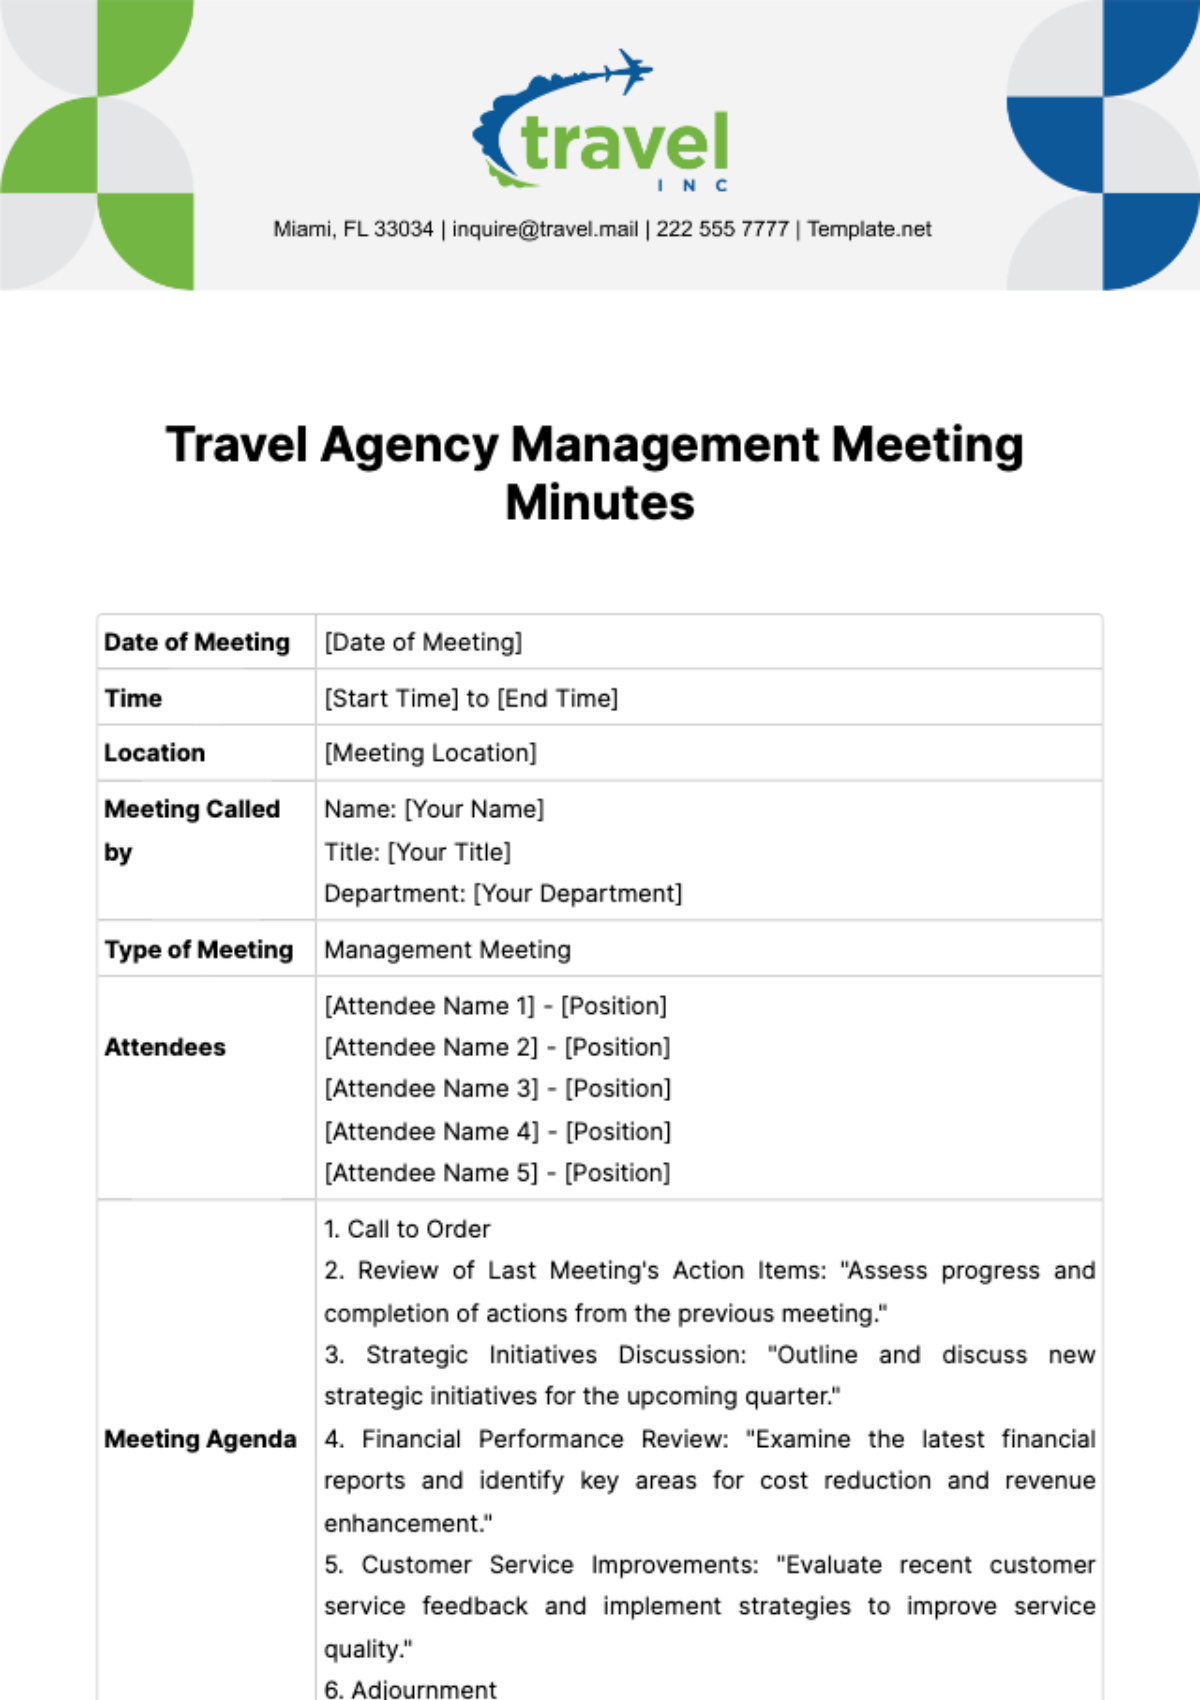 Travel Agency Management Meeting Minutes Template